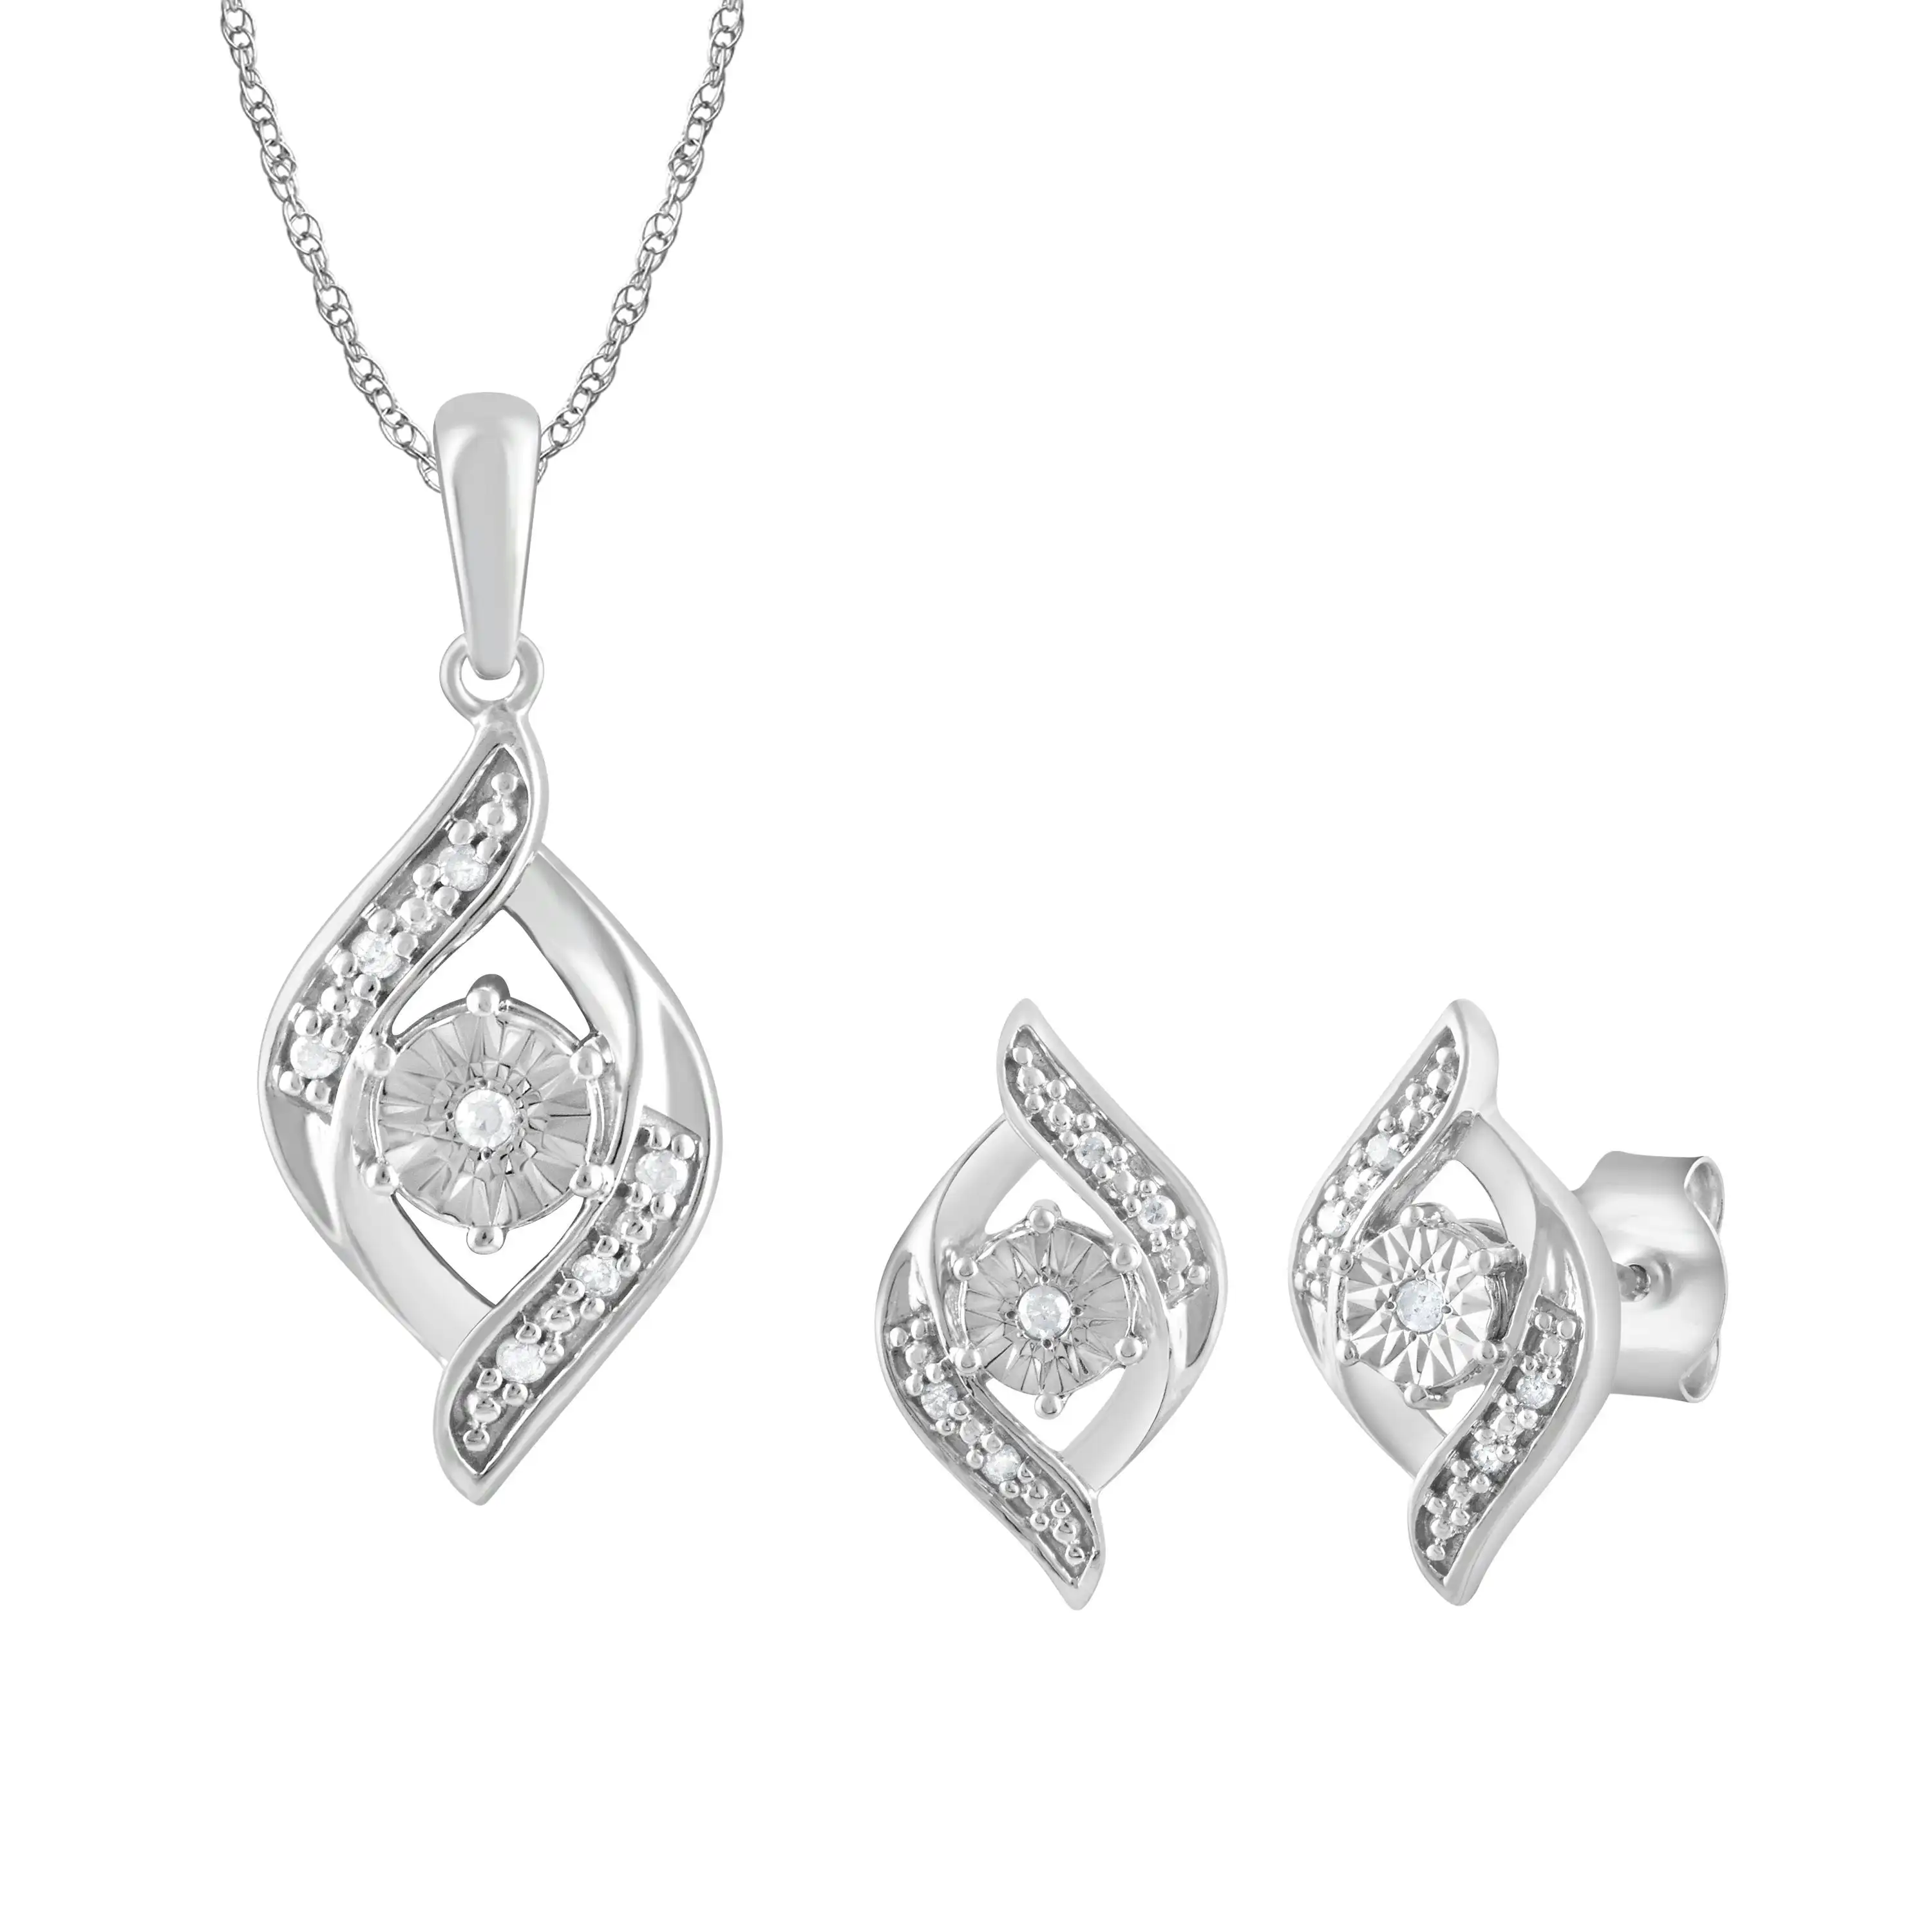 Flame Shape Stud Earrings and Necklace Set with 0.05ct of Diamonds in Sterling Silver